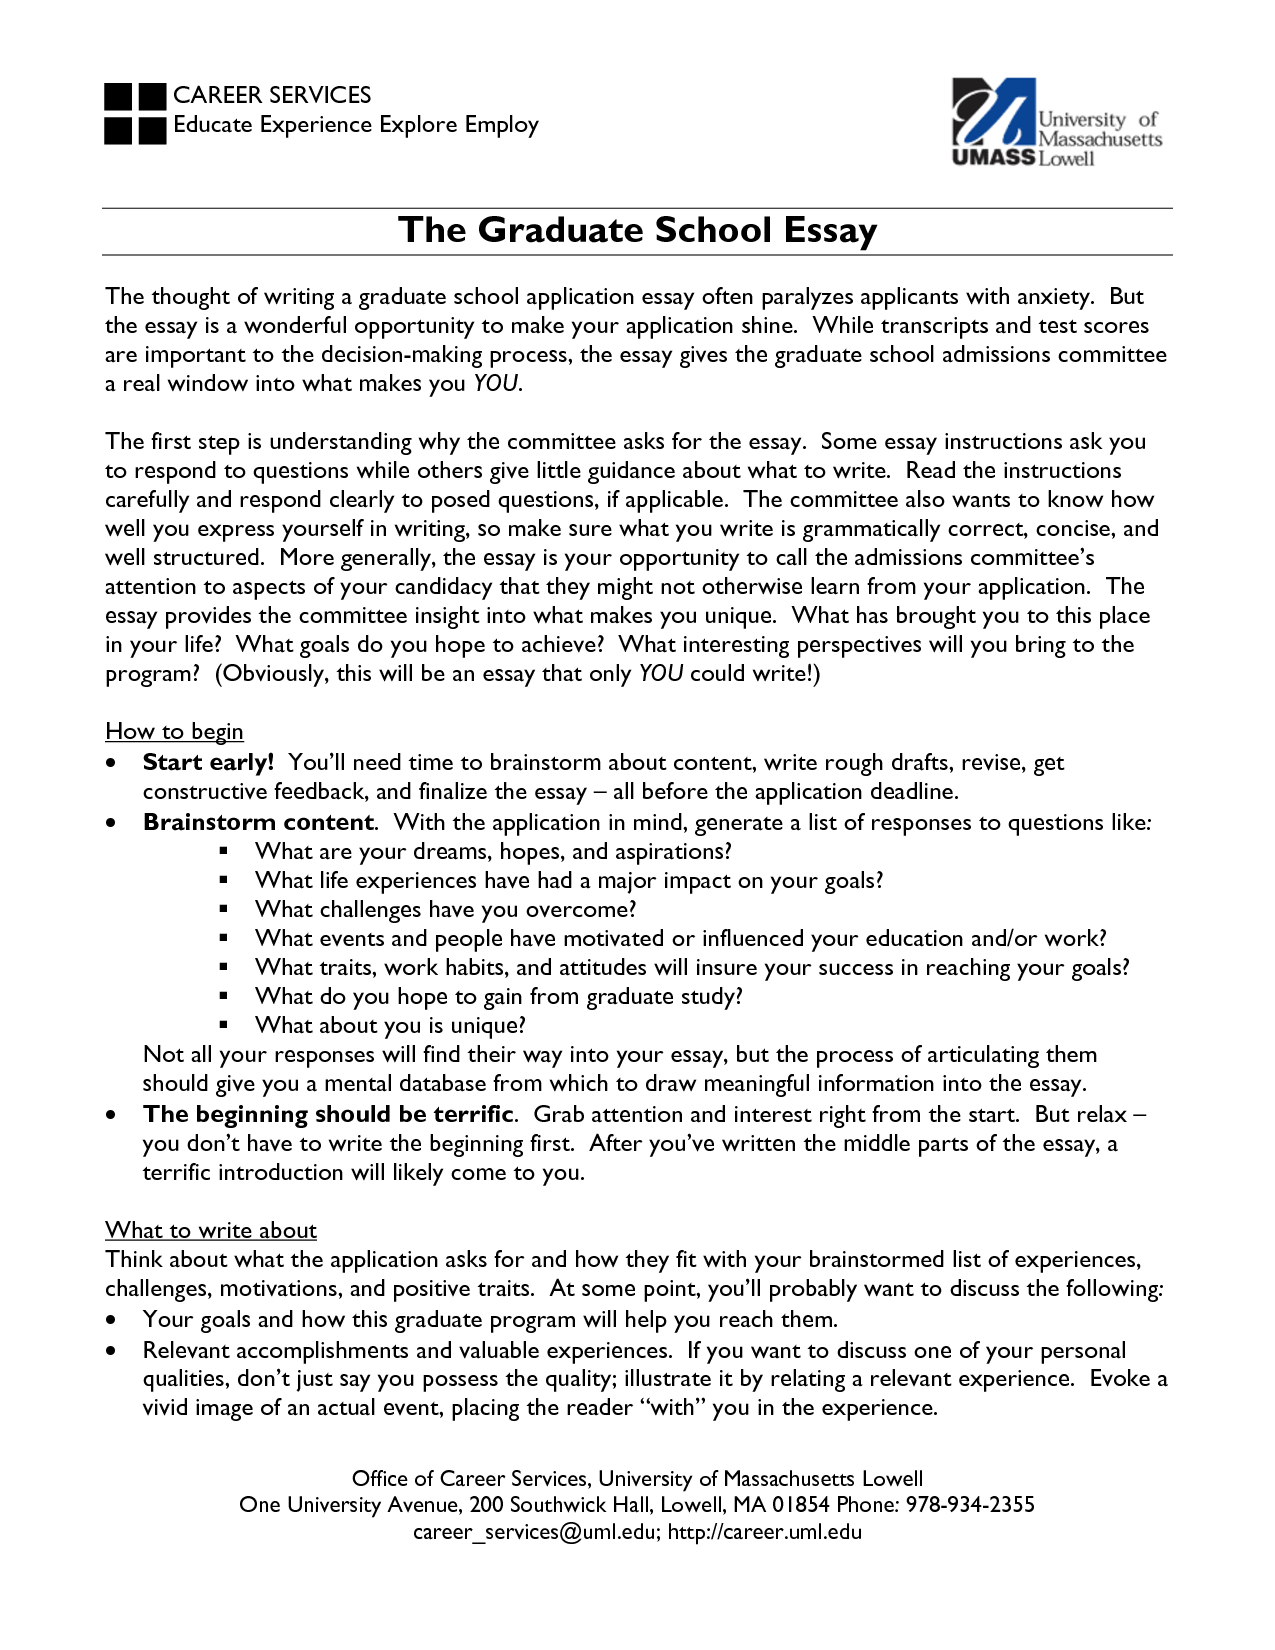 Master's essay: buy academic papers of the highest quality